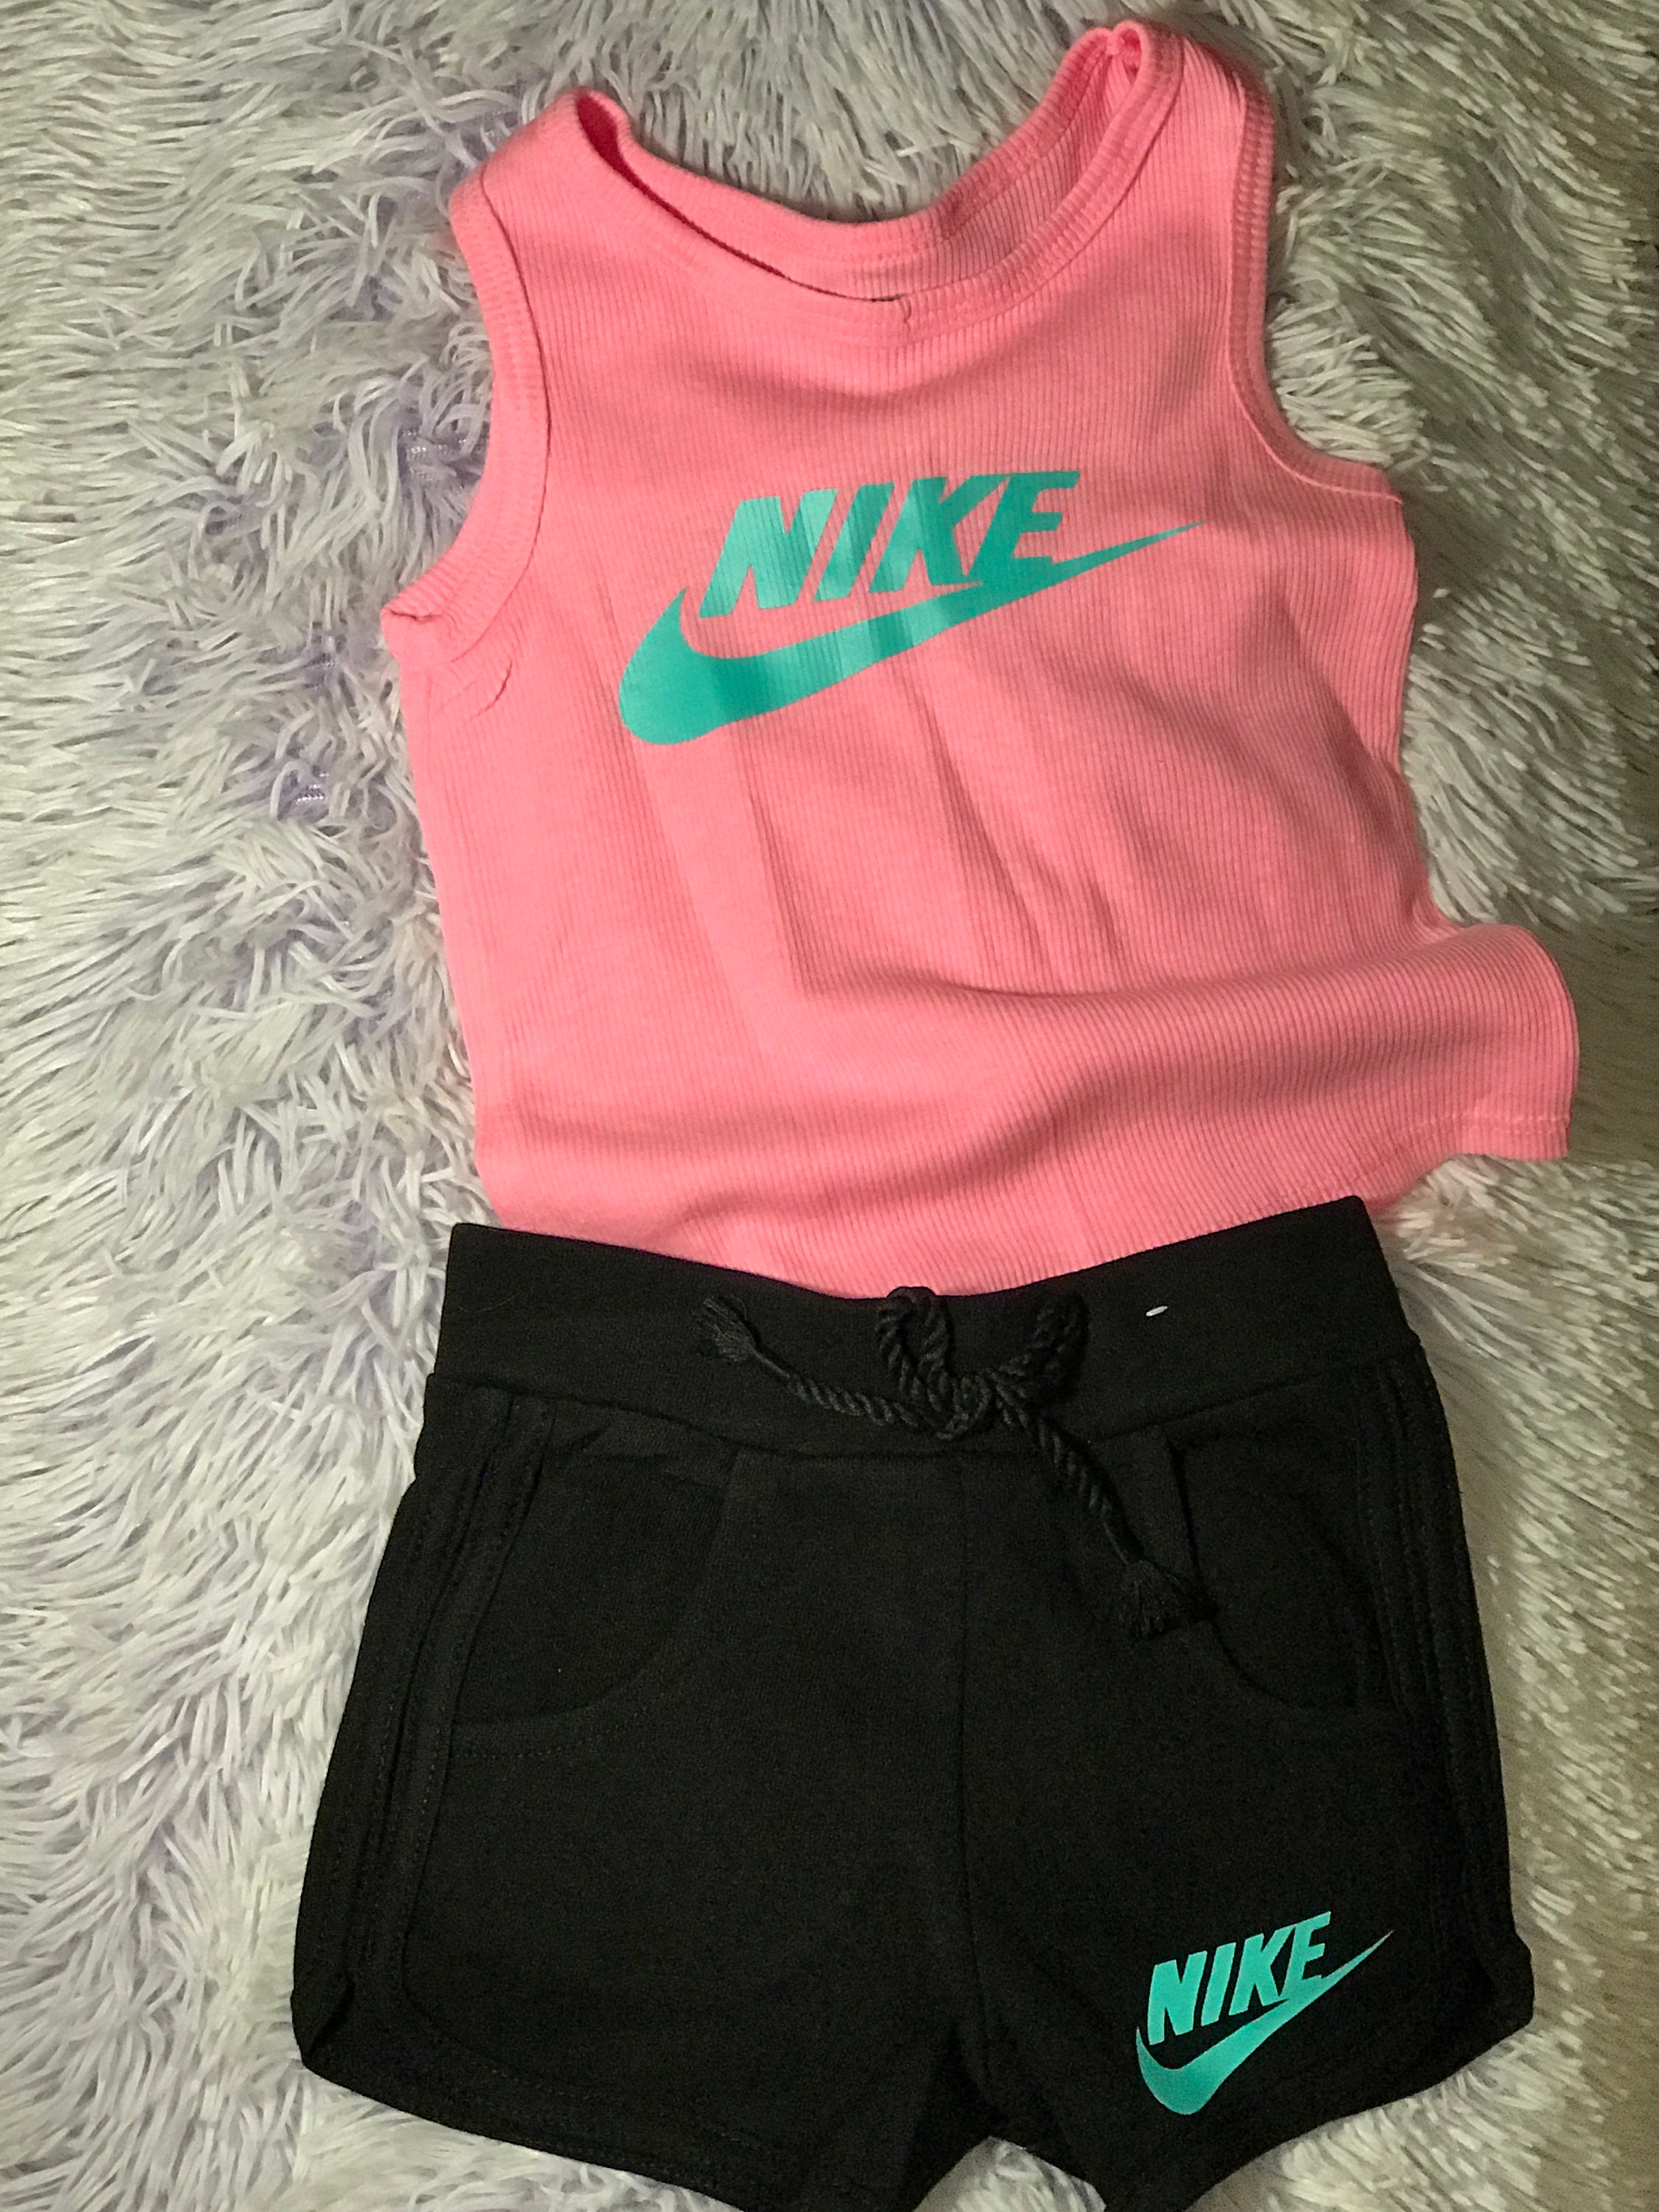 Nike inspired outfit | Etsy